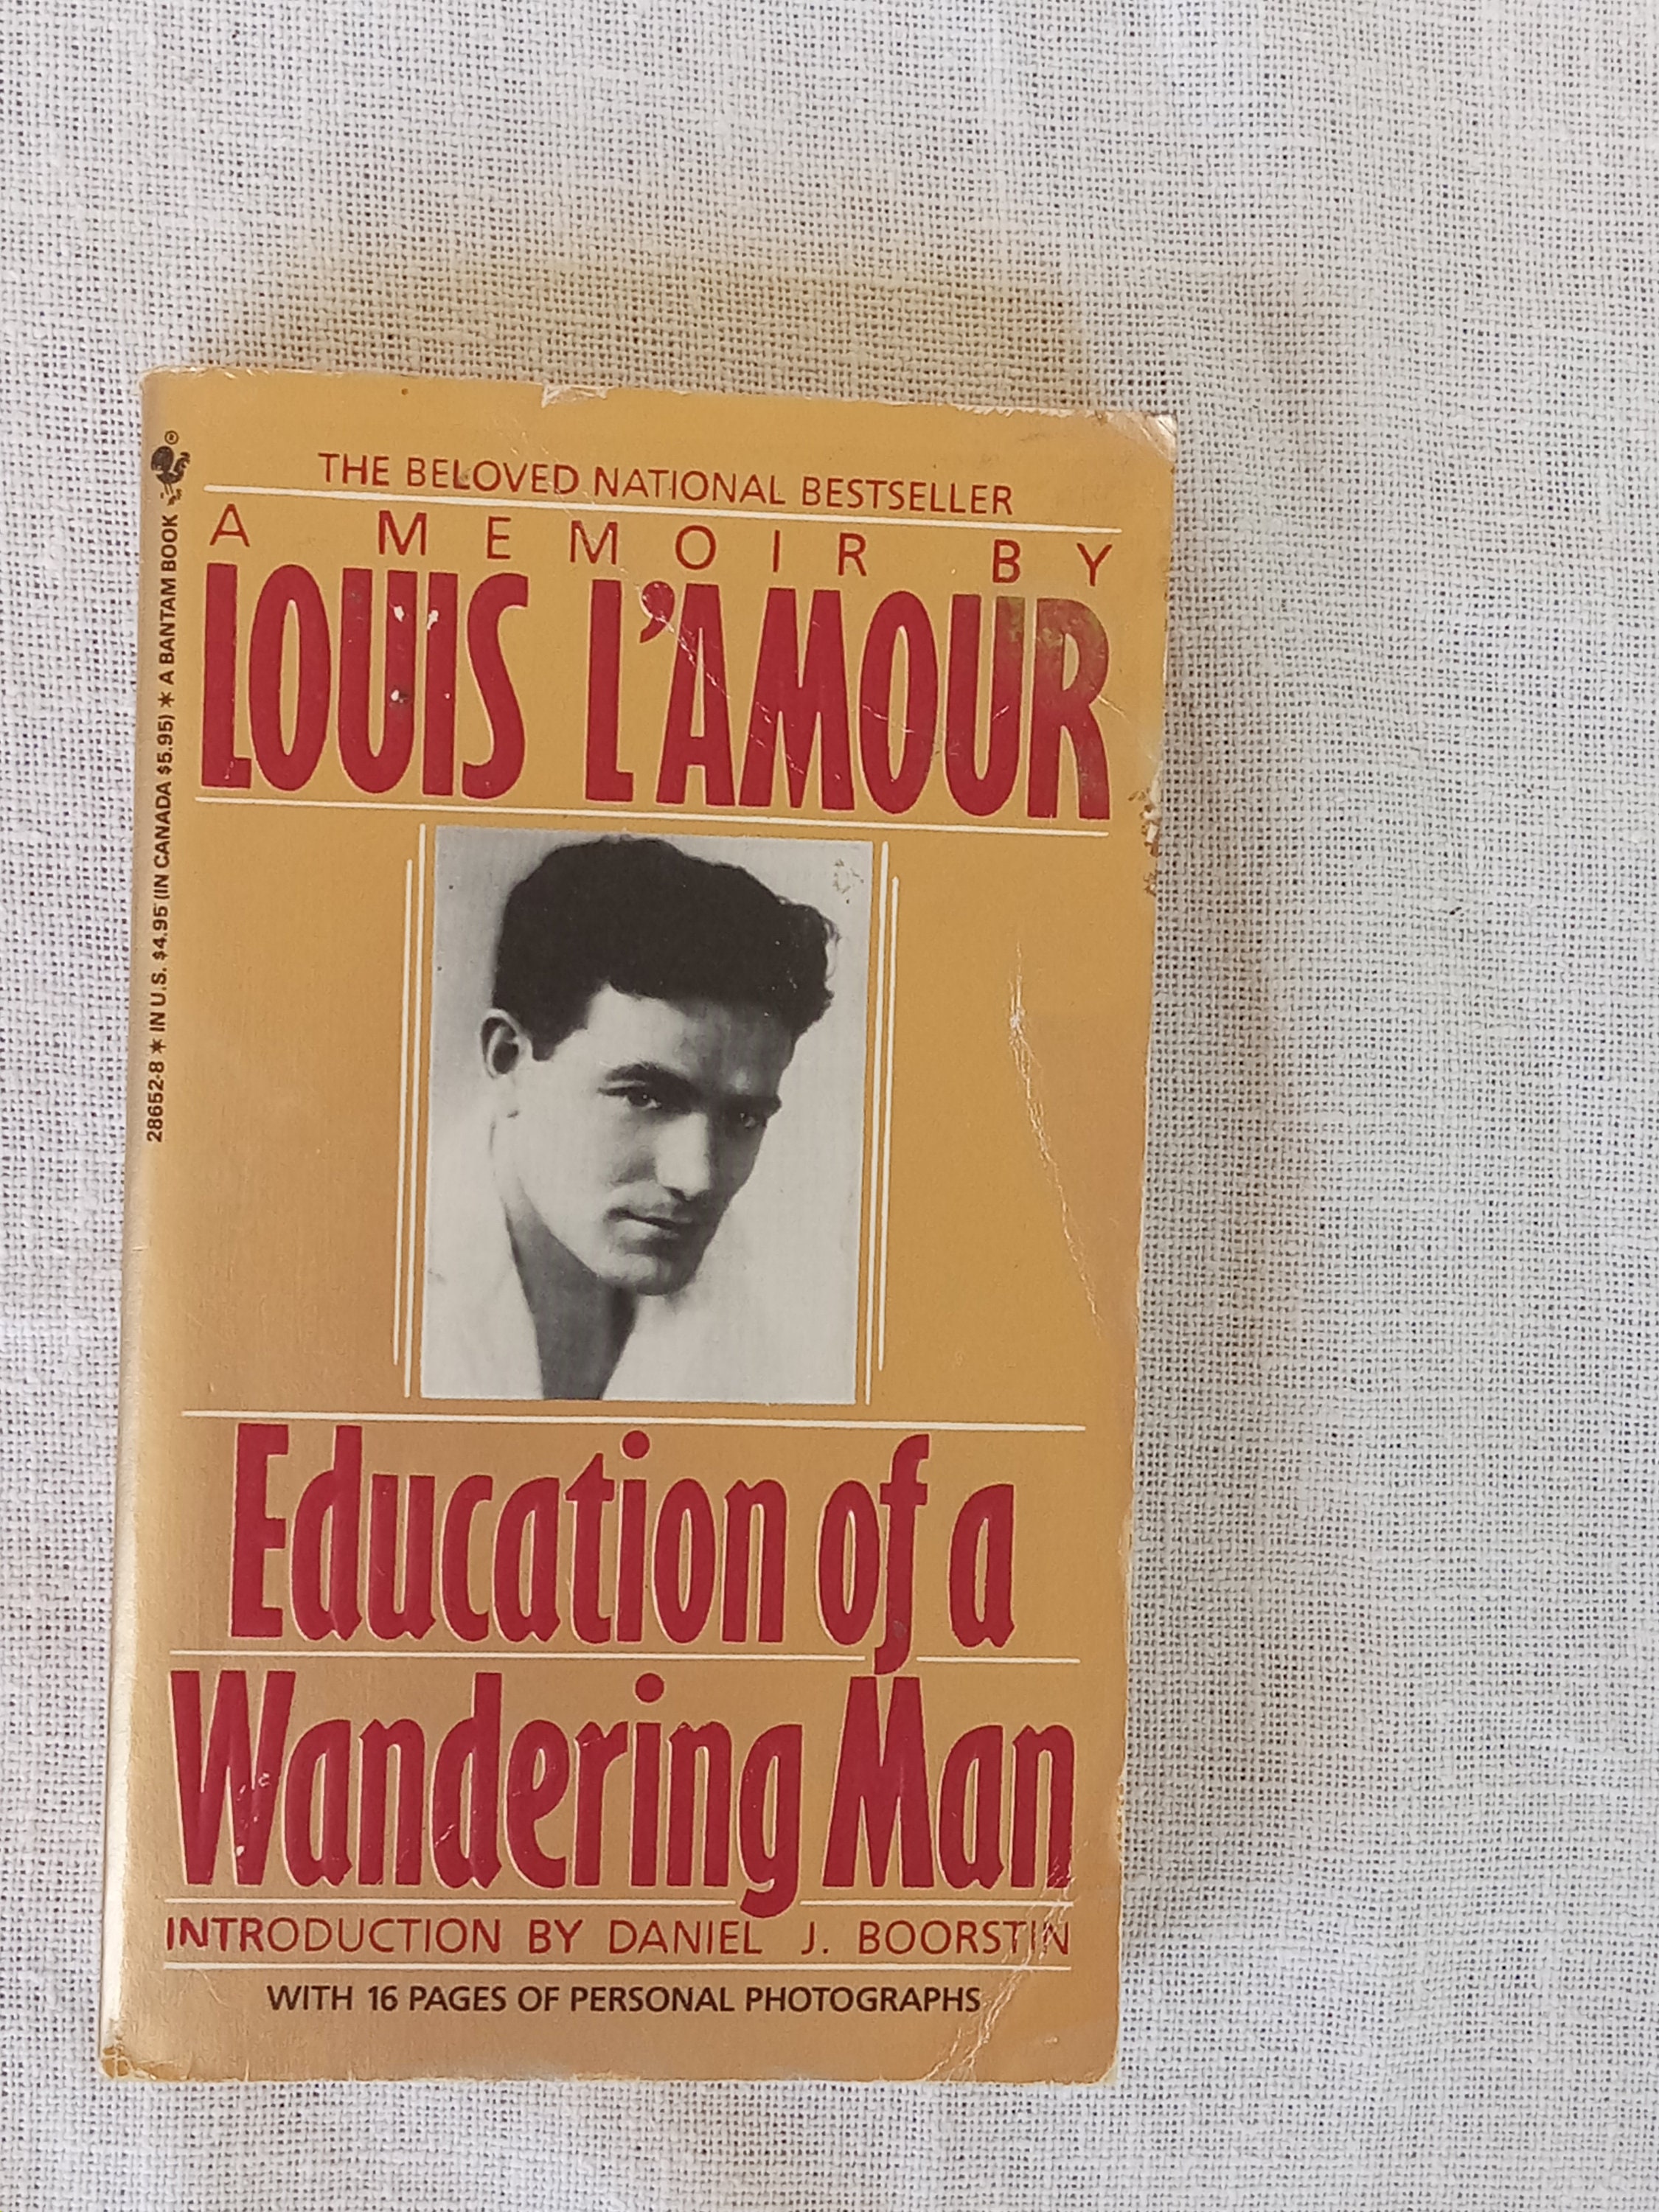 The Lonely Men (The Sacketts, #12) by Louis L'Amour